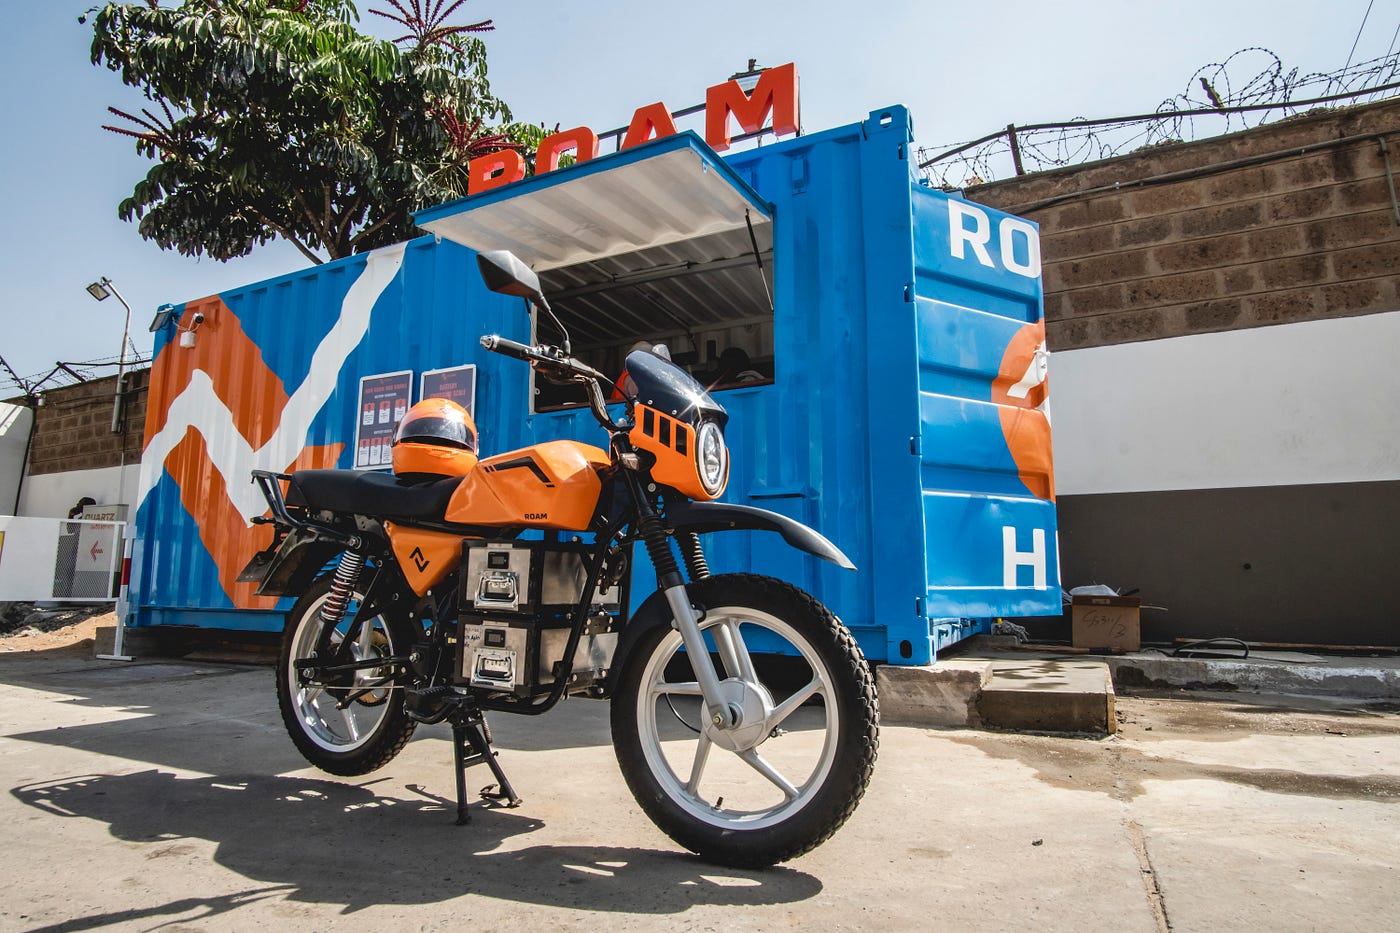 Roam Secures $24M To Expand Electric Vehicle Production In Kenya